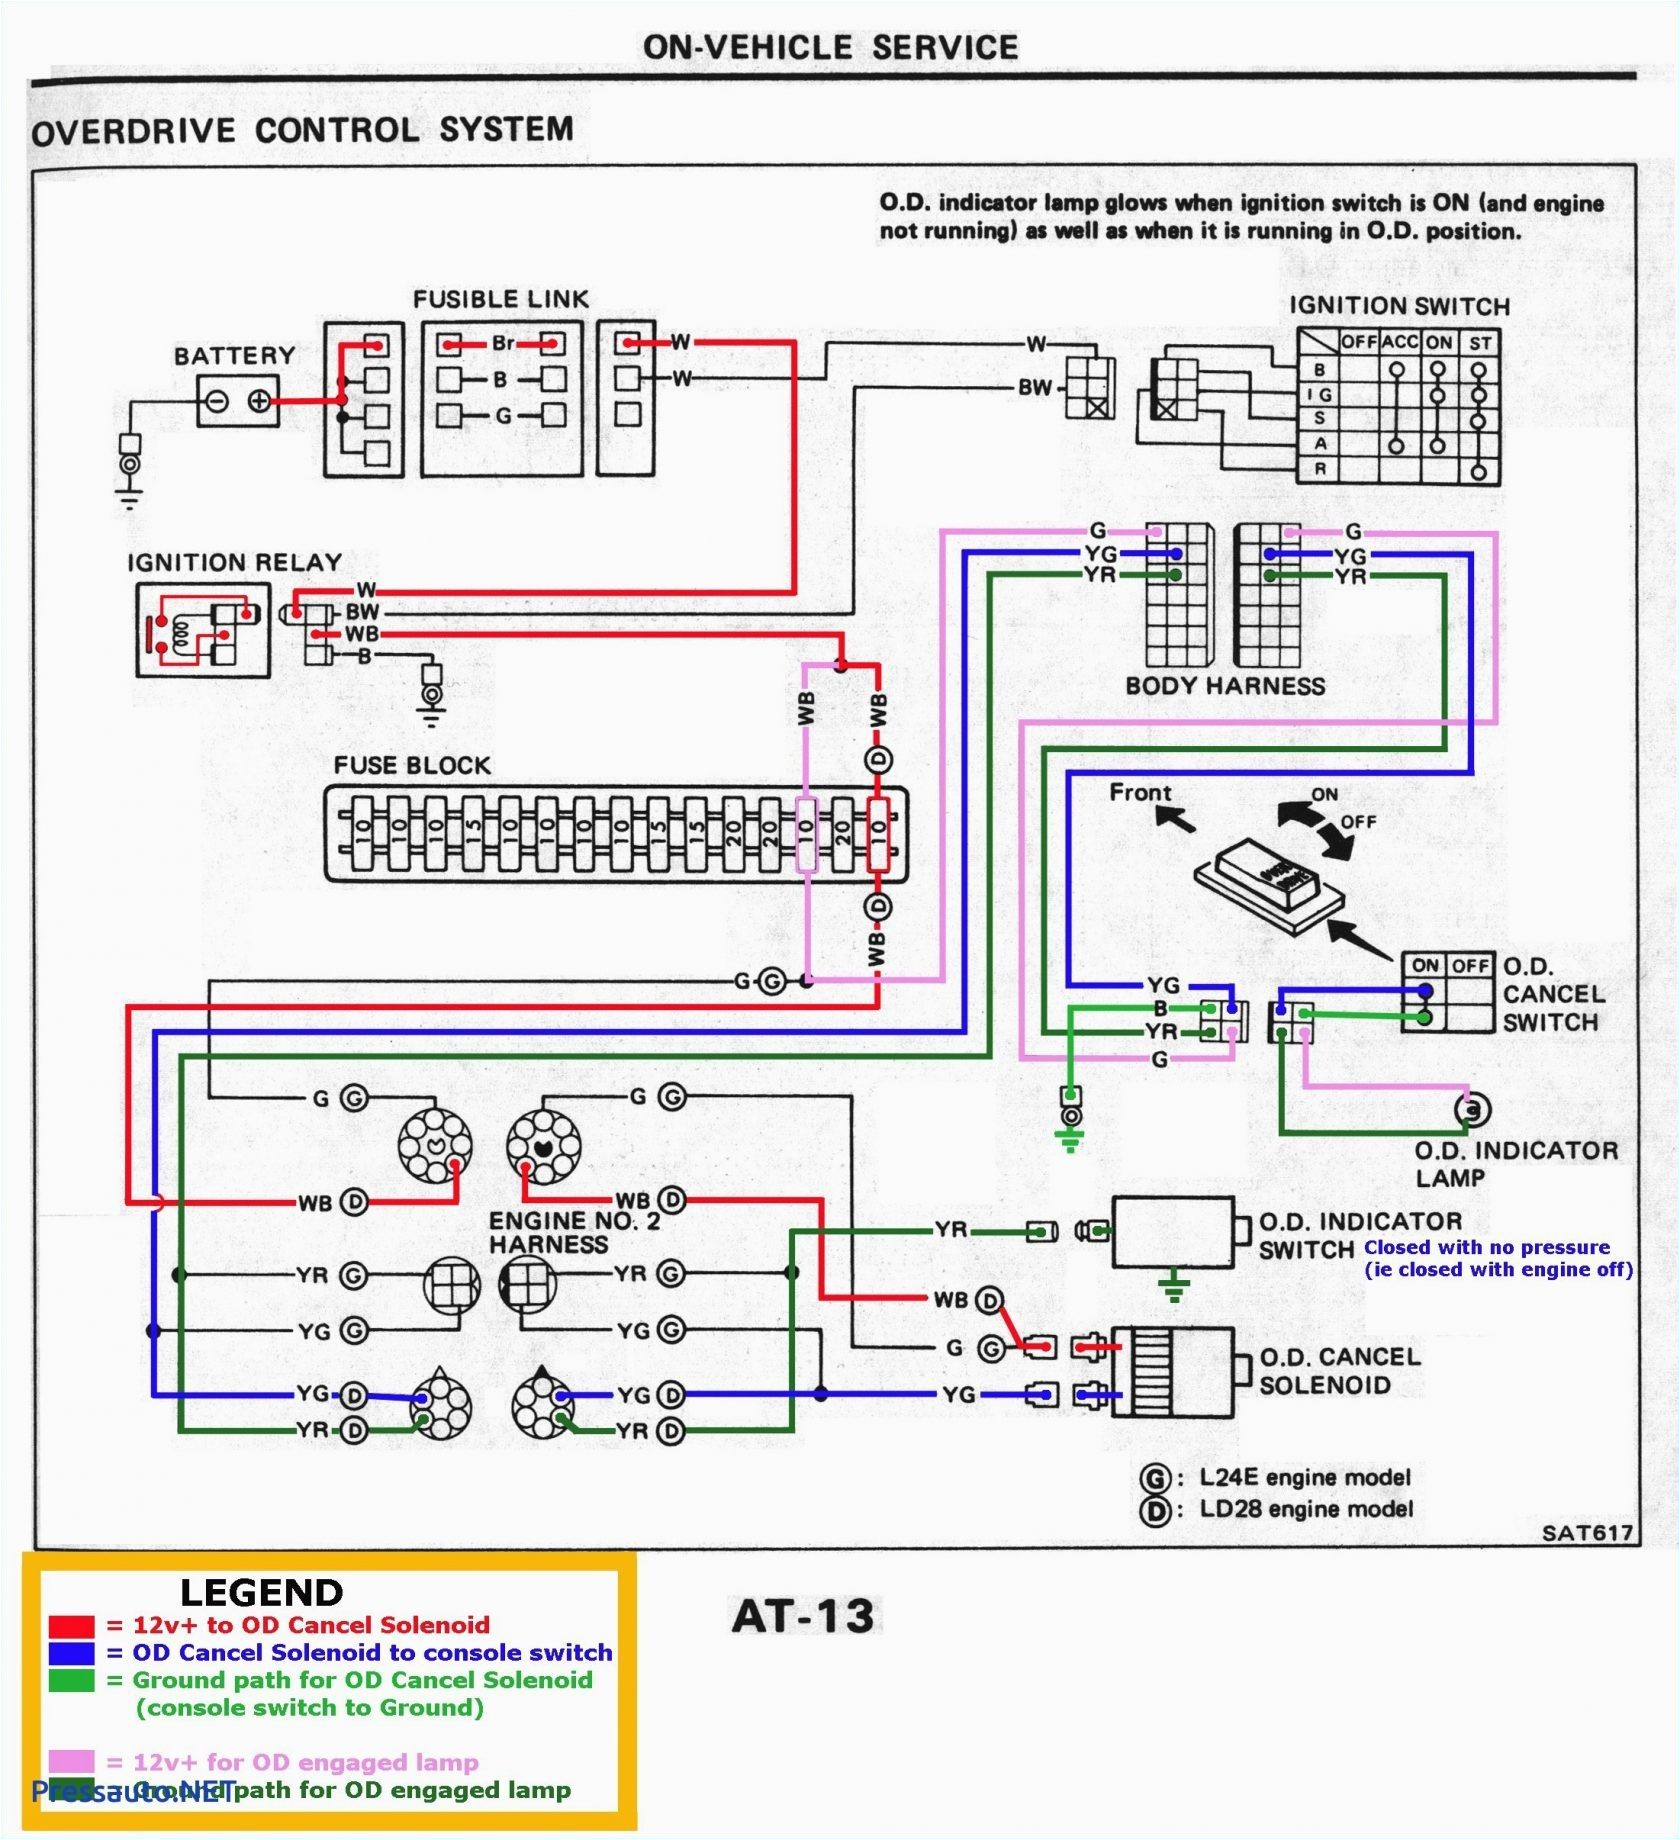 peugeot fight x wiring diagram wiring diagram blog peugeot 807 airbag wiring diagram wiring diagram review